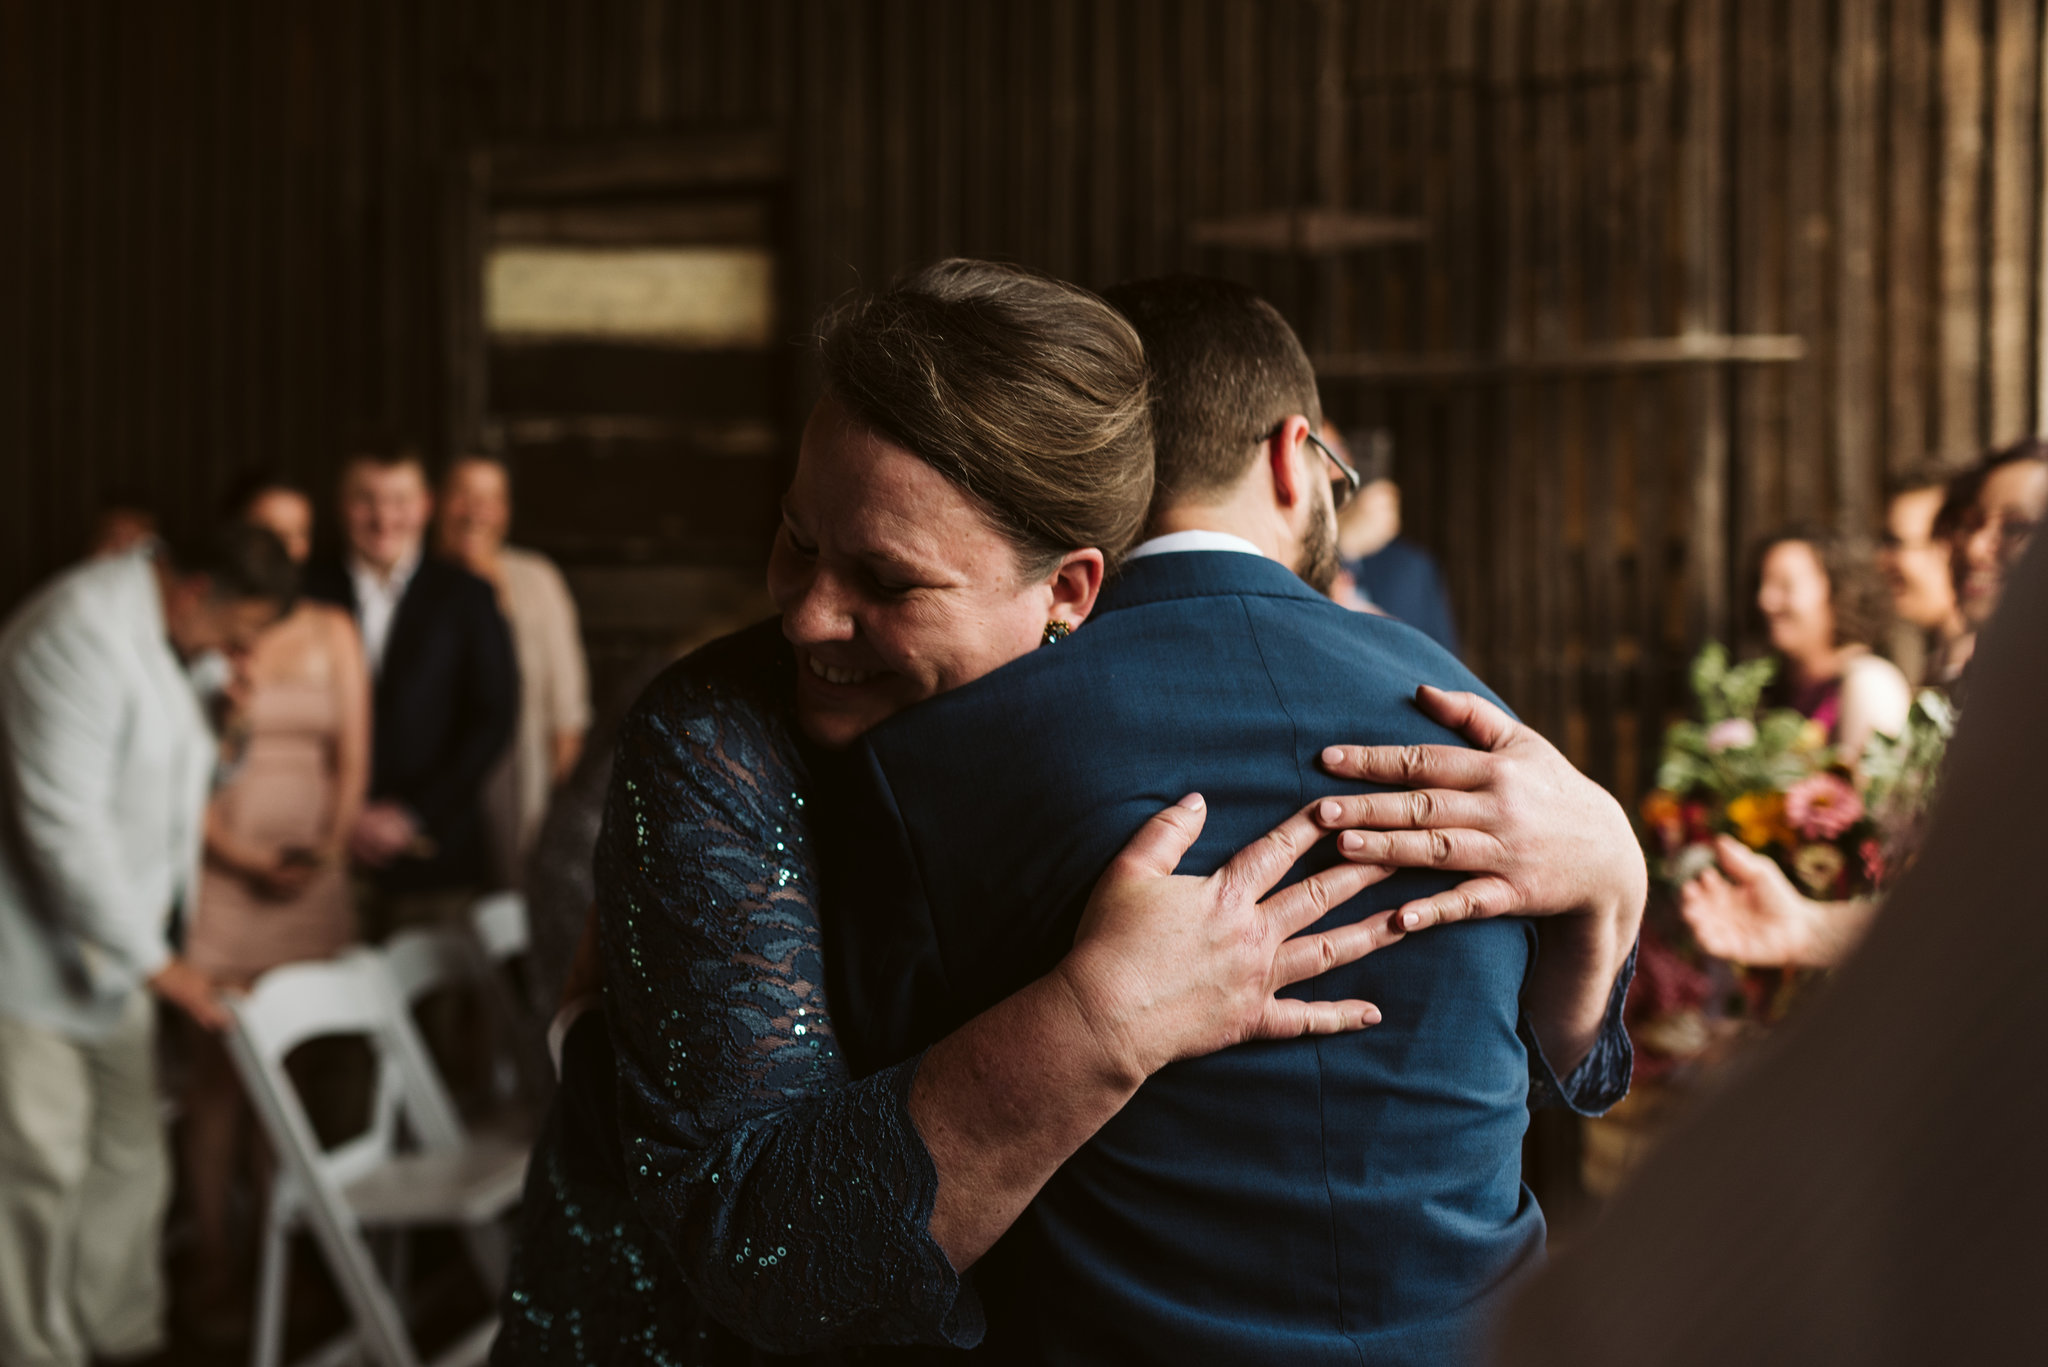 Rocklands Farm, Maryland, Intimate Wedding, Baltimore Wedding Photographer, Sungold Flower Co, Rustic, Romantic, Barn Wedding, Mother of the Bride Hugging Groom at Ceremony